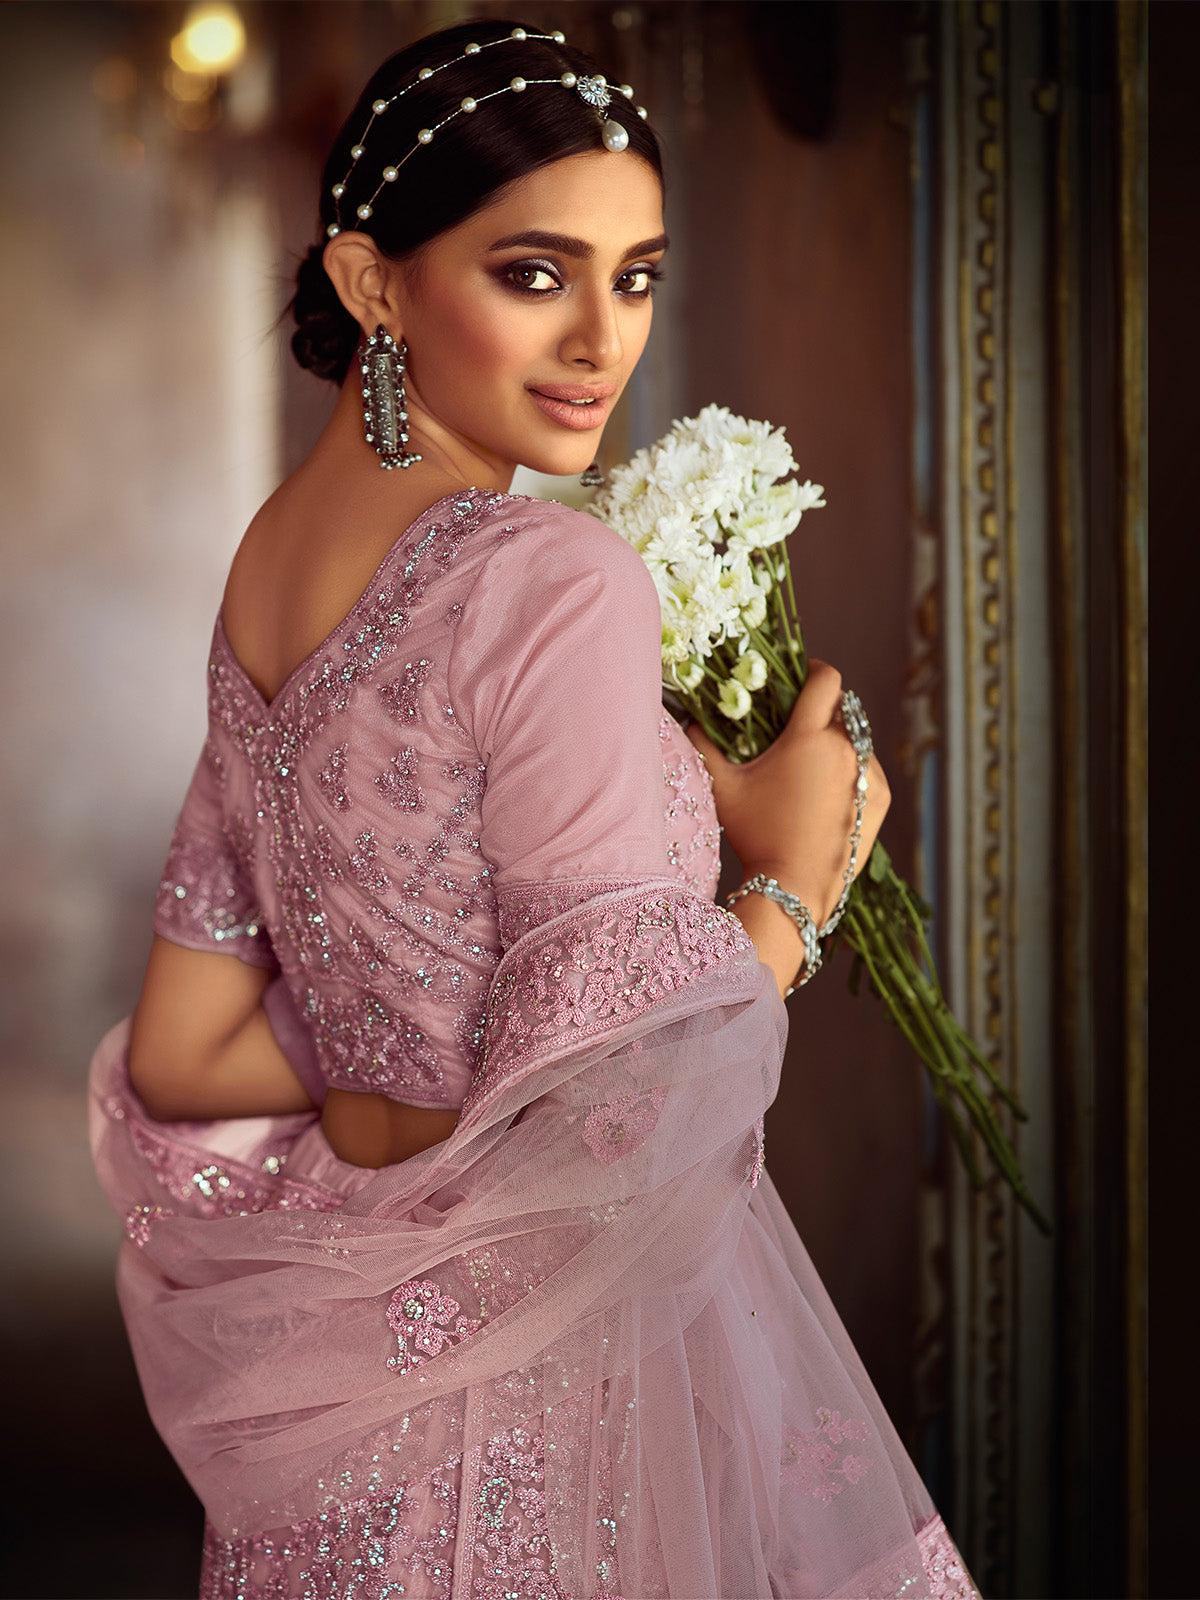 Pink Embroidered Soft Net Semi Stitched Lehenga With Unstitched Blouse